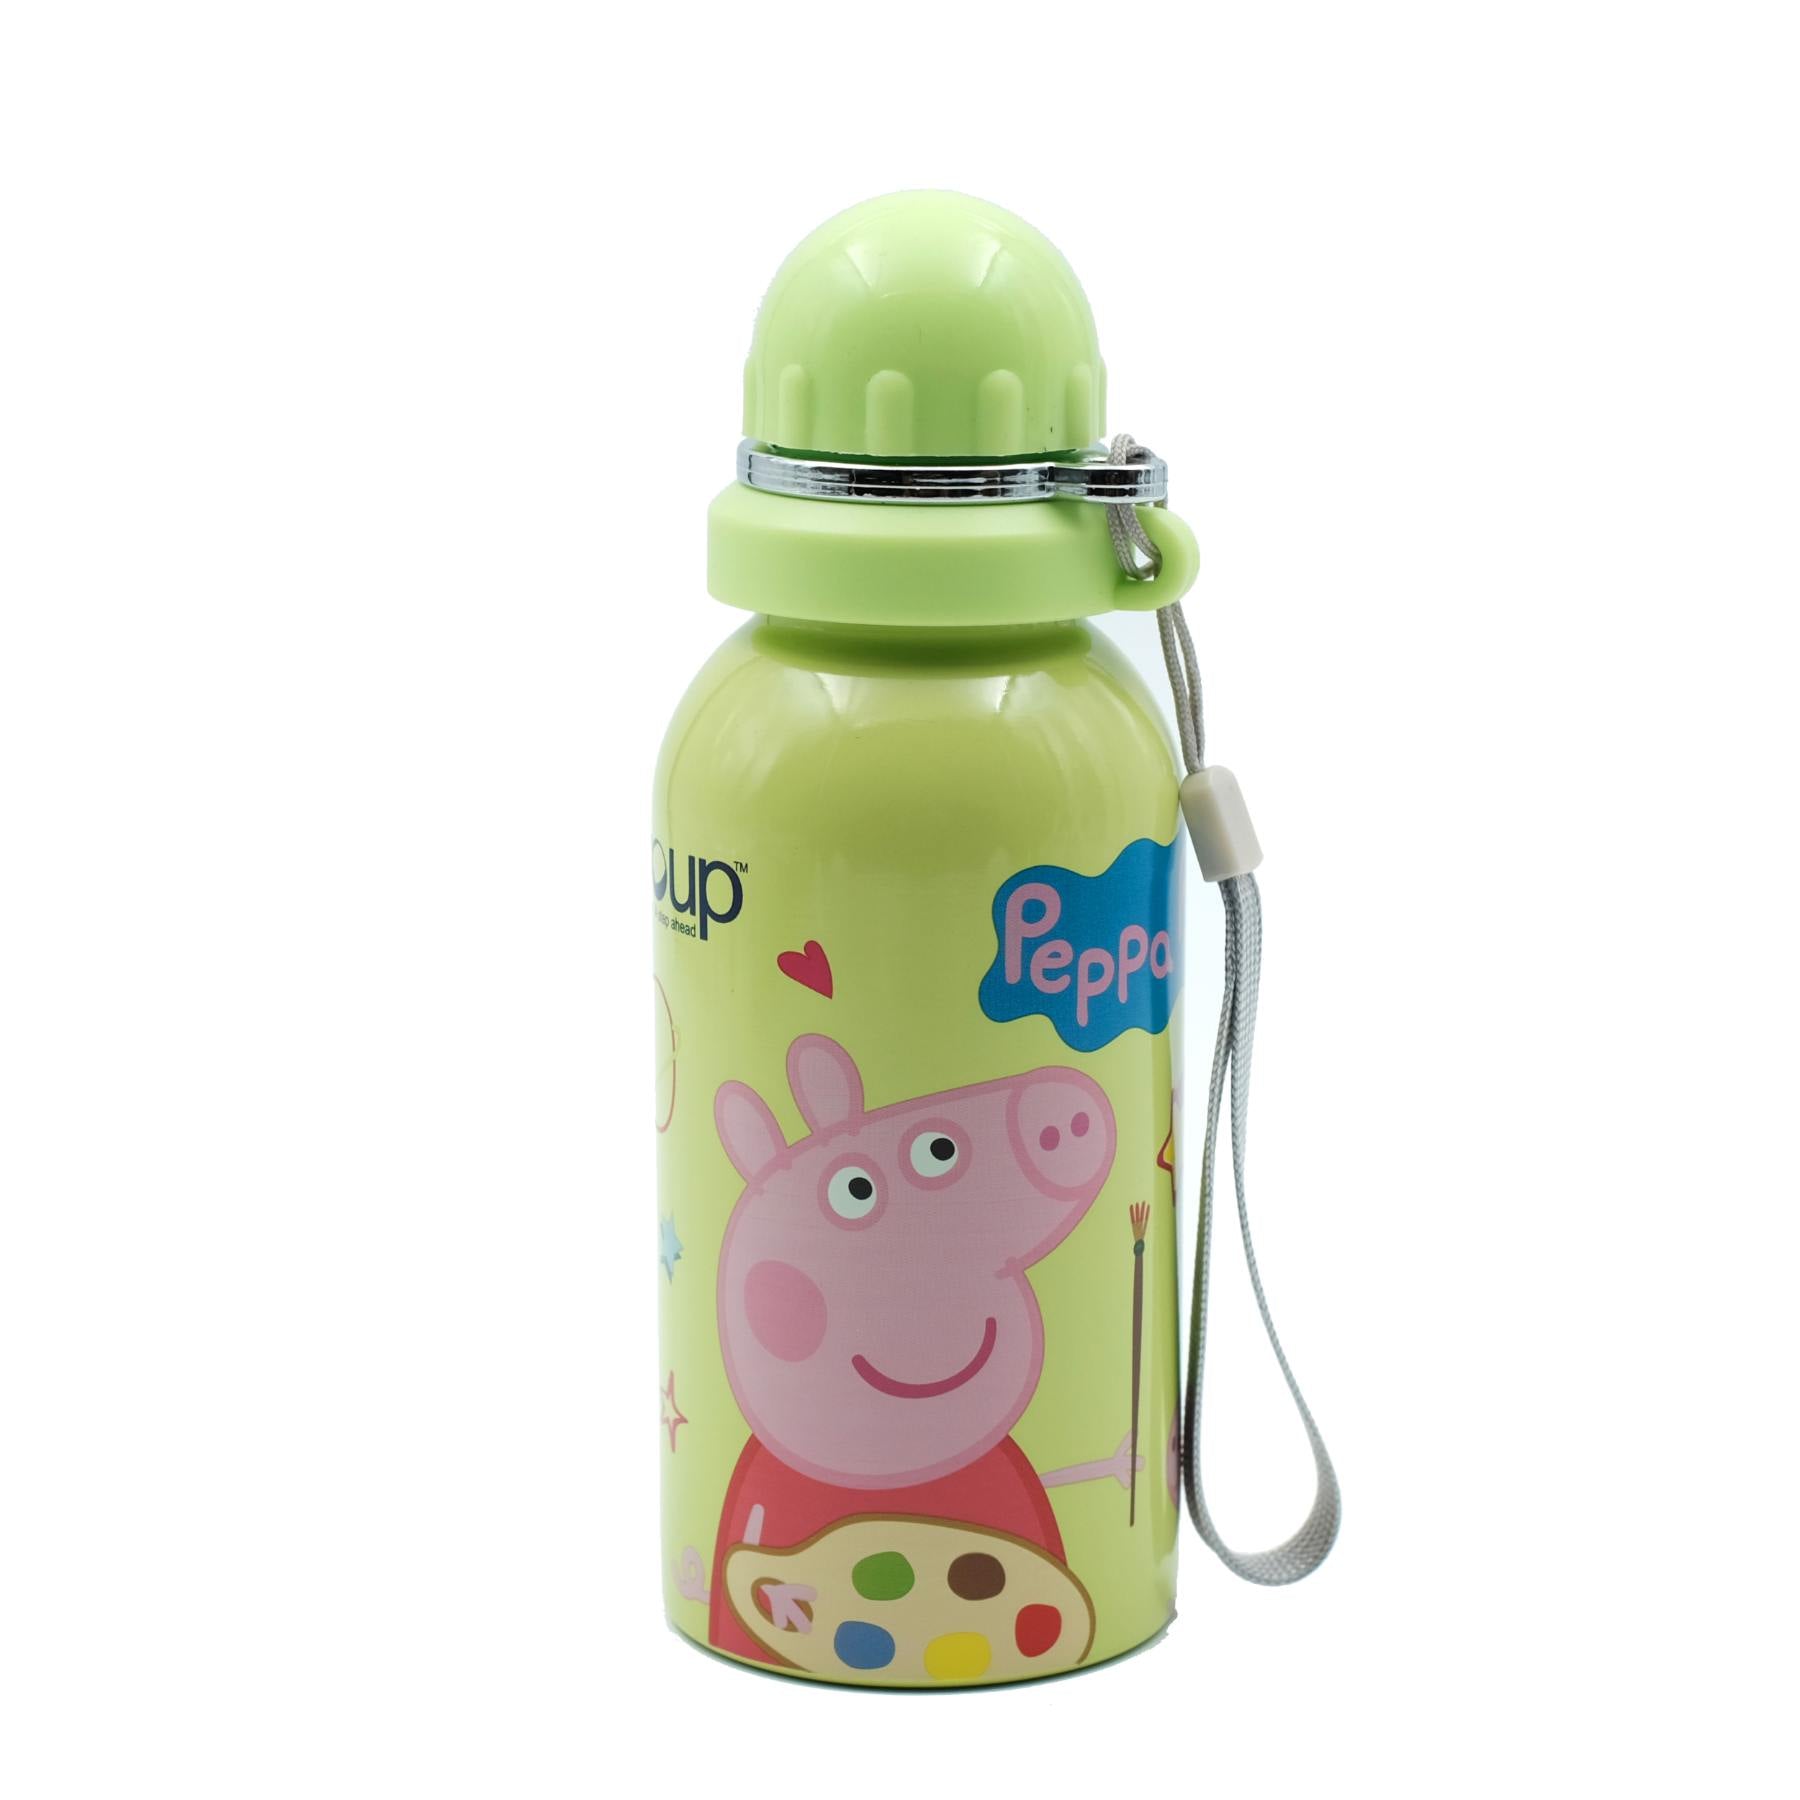 Youp Stainless Steel Green Color Peppa Pig Kids Water Bottle HYBRID - 500 Ml